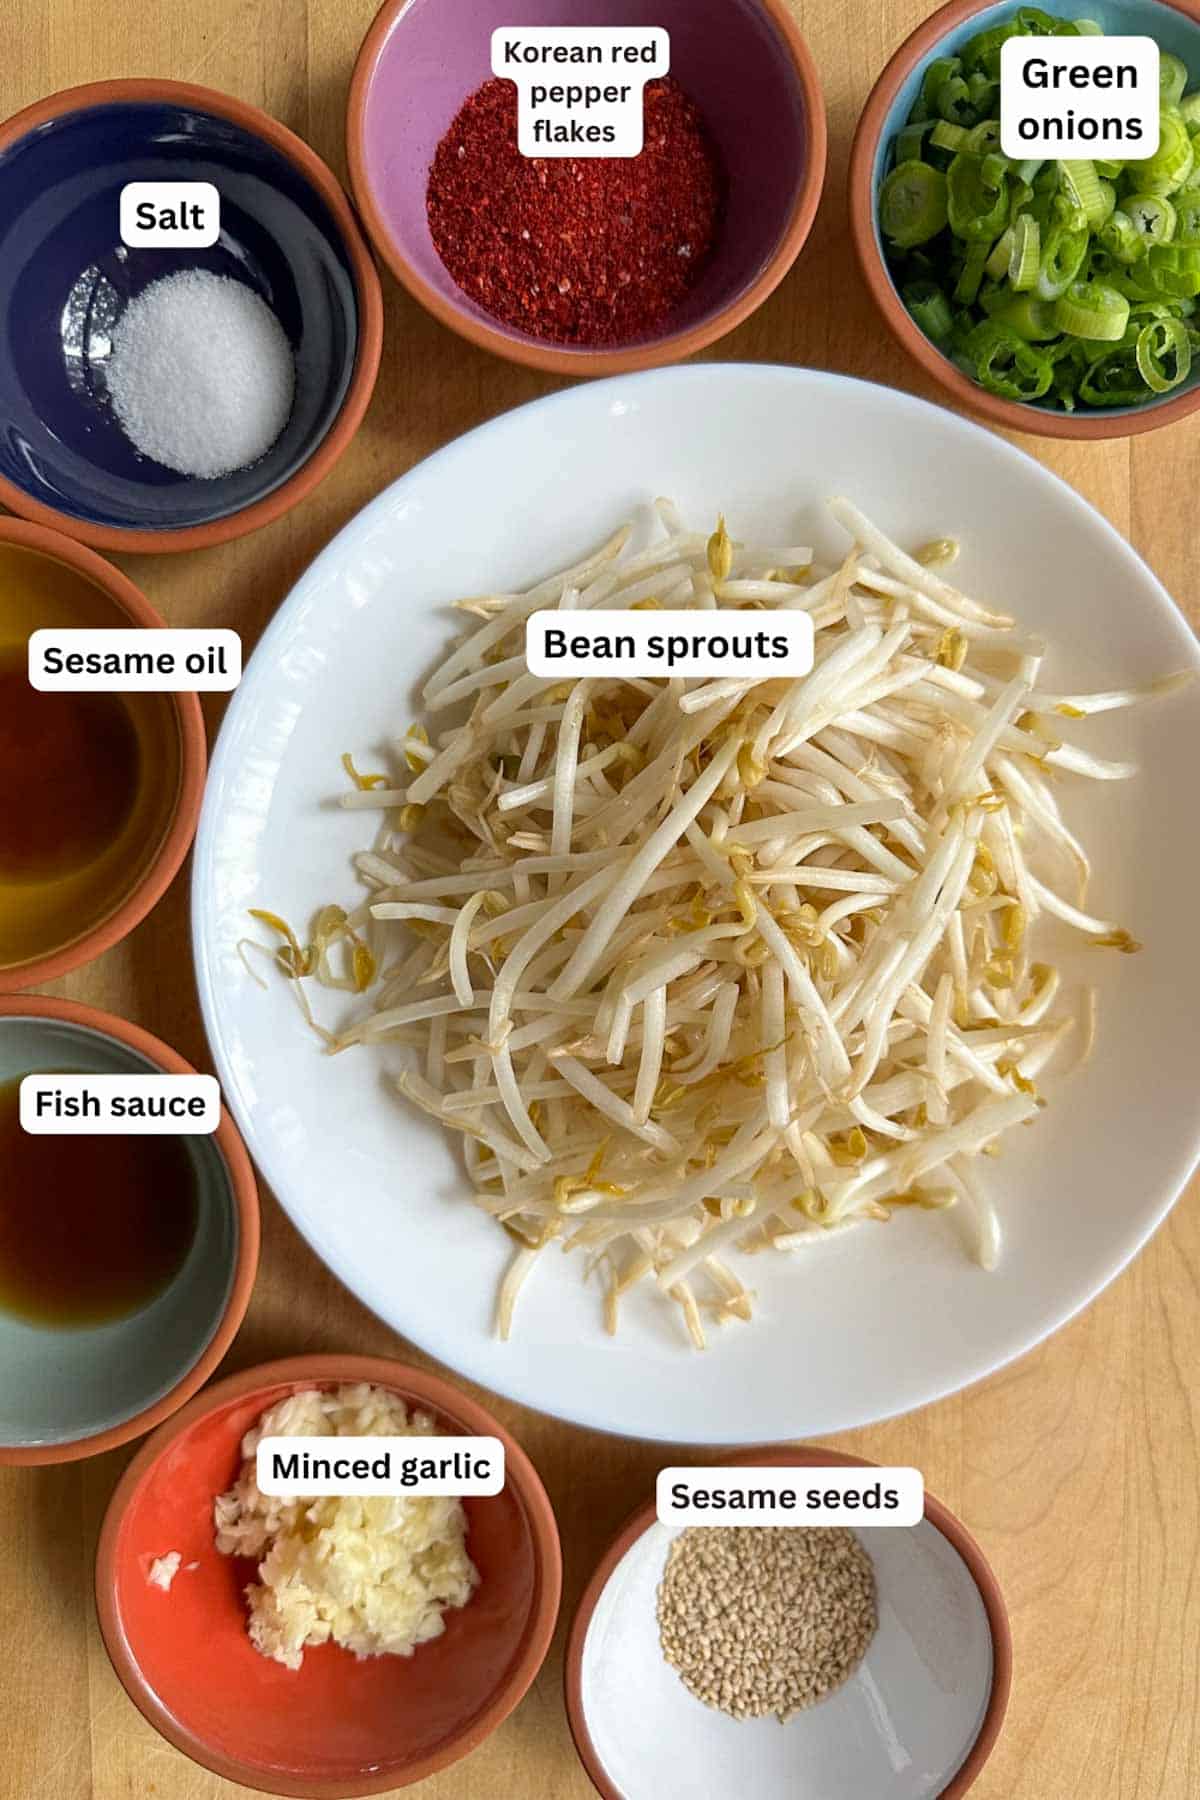 Ingredients for Korean Spicy Bean Sprouts displayed in bowls containing green onions, Korean red pepper flakes, salt, sesame oil, bean sprouts, fish sauce, minced garlic, and sesame seeds.